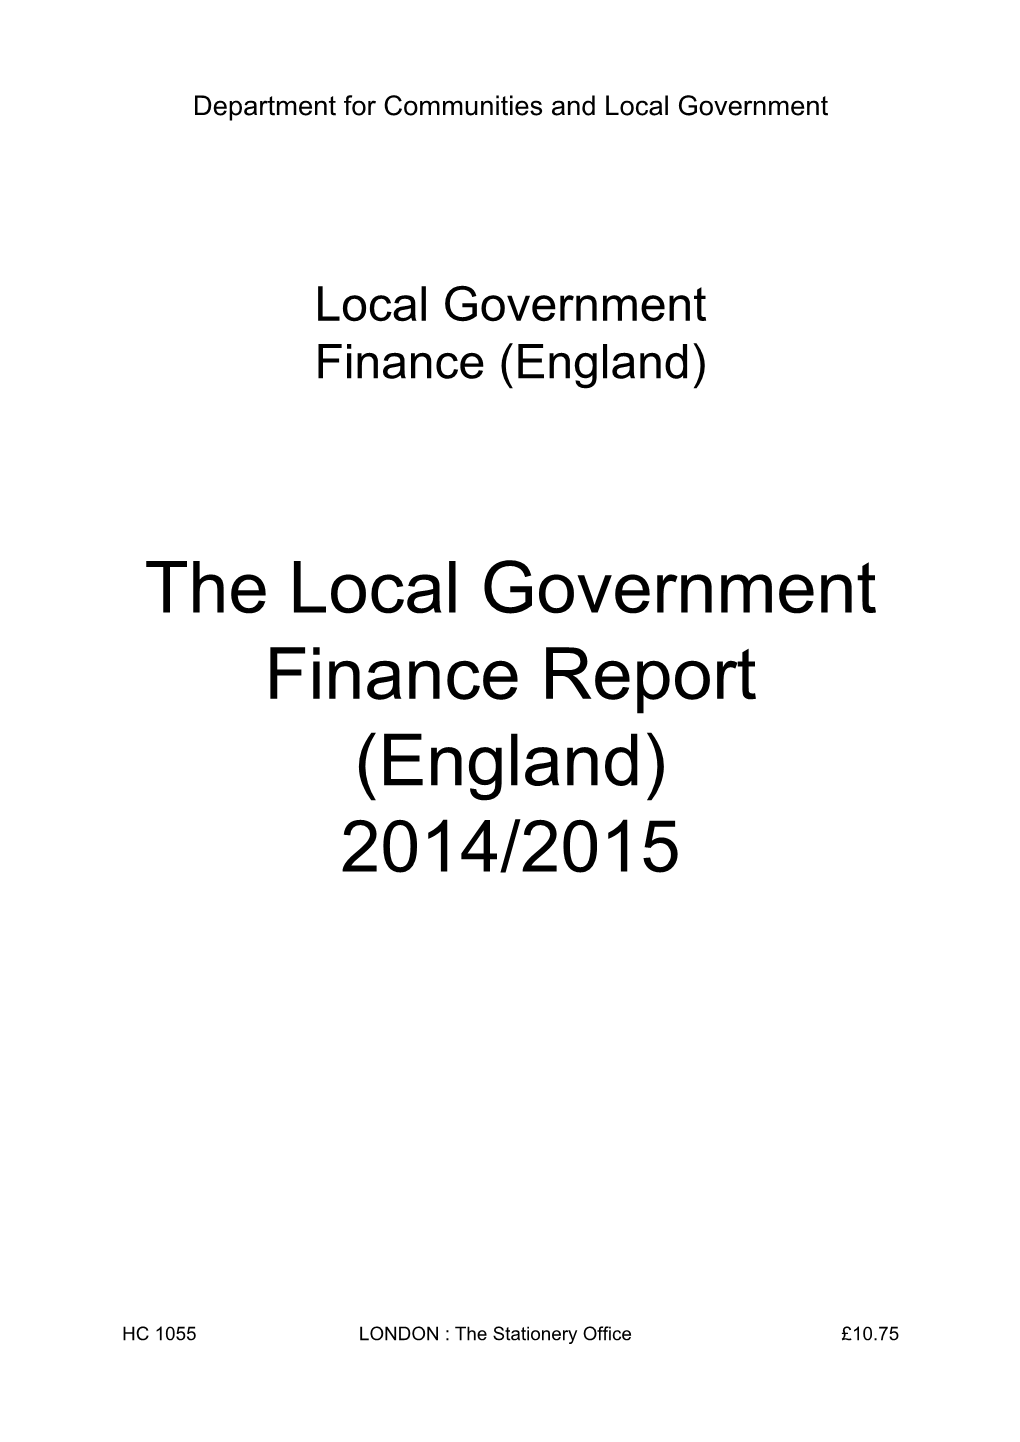 The Local Government Finance Report (England) 2014/2015